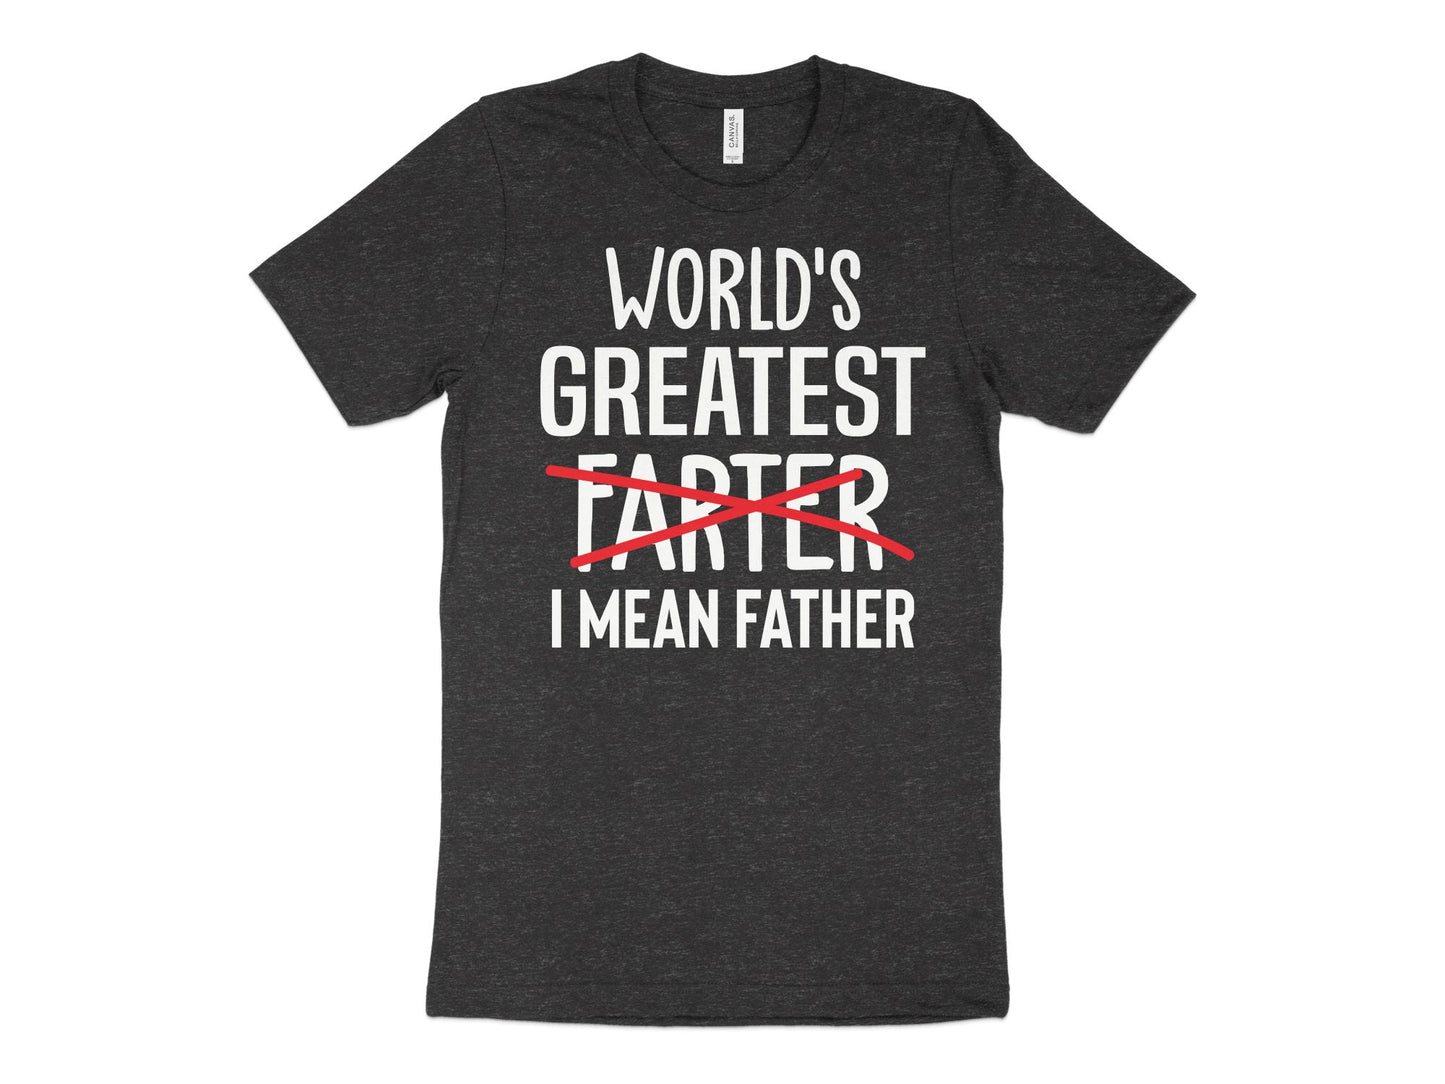 World's Greatest Farter I Mean Father Shirt, charcoal